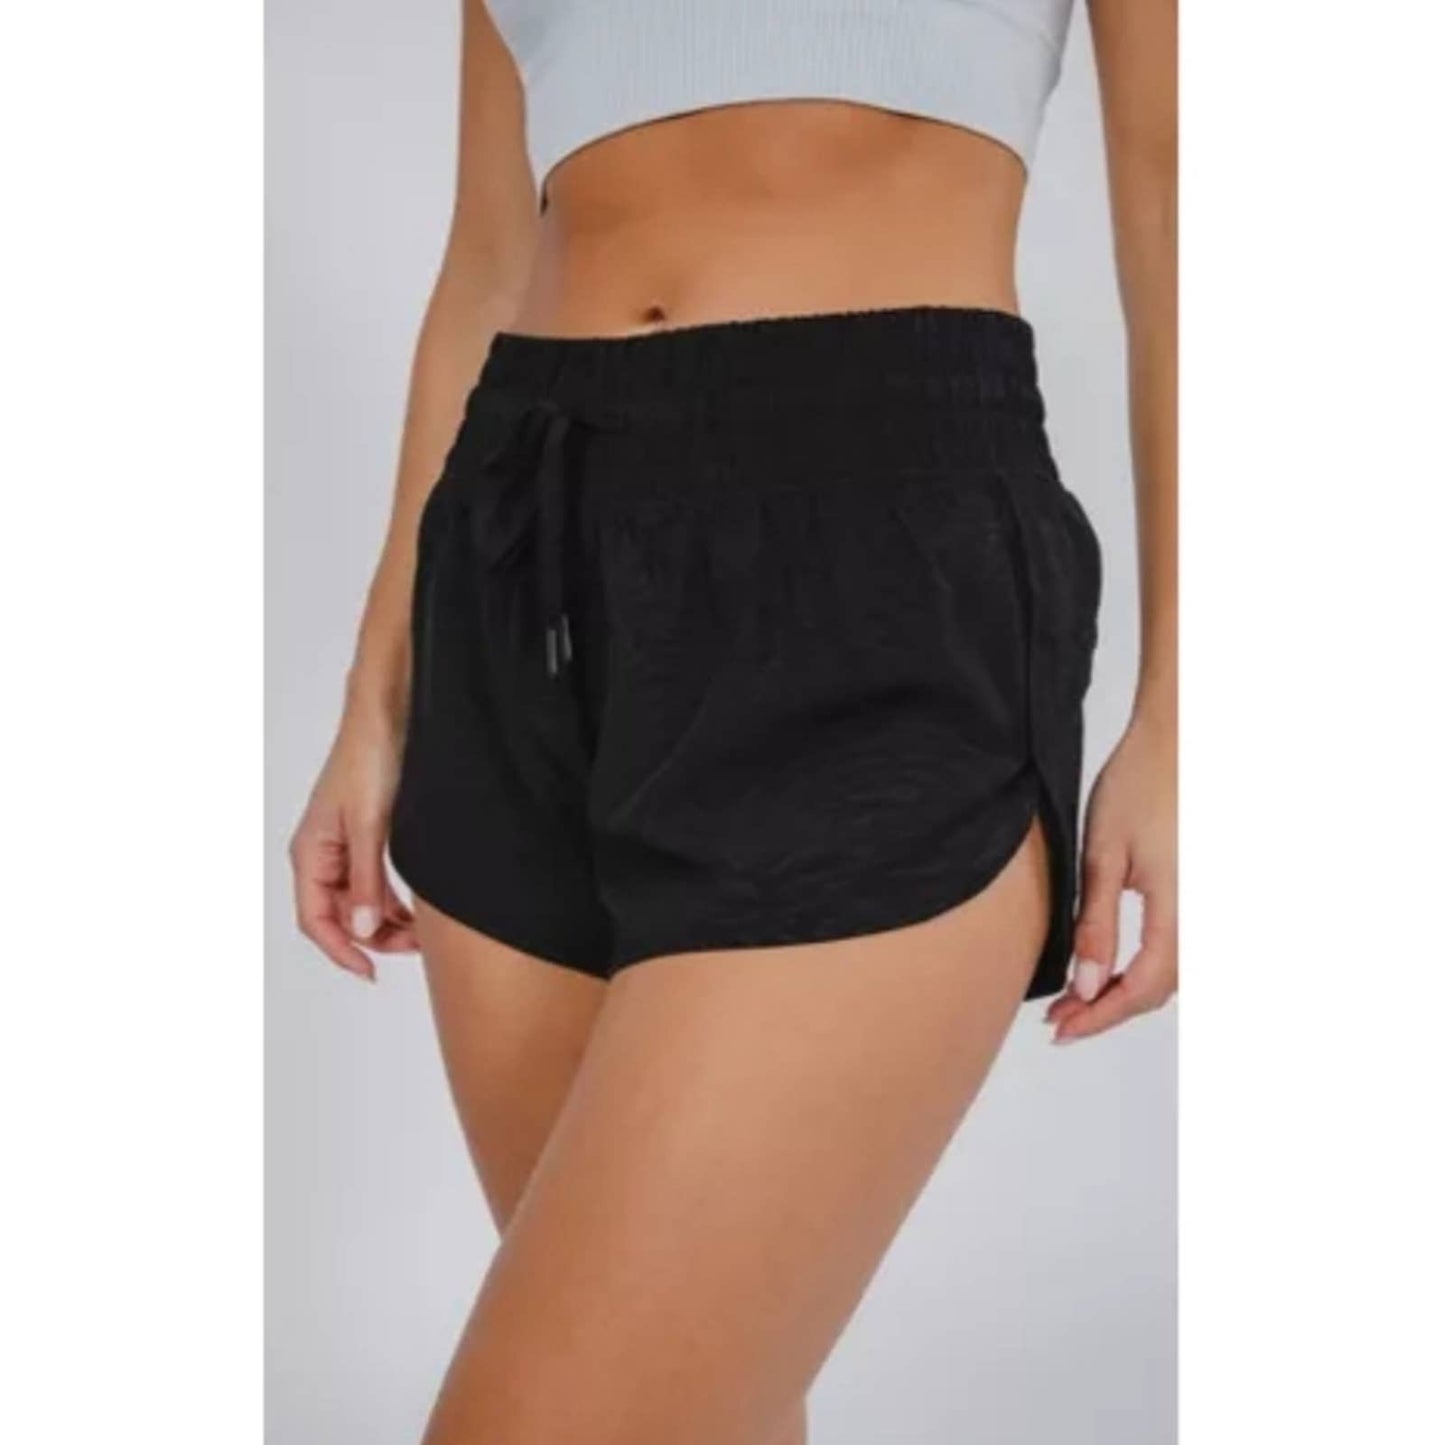 90 Degree By Reflex Woven Running Shorts with Built-In Panty